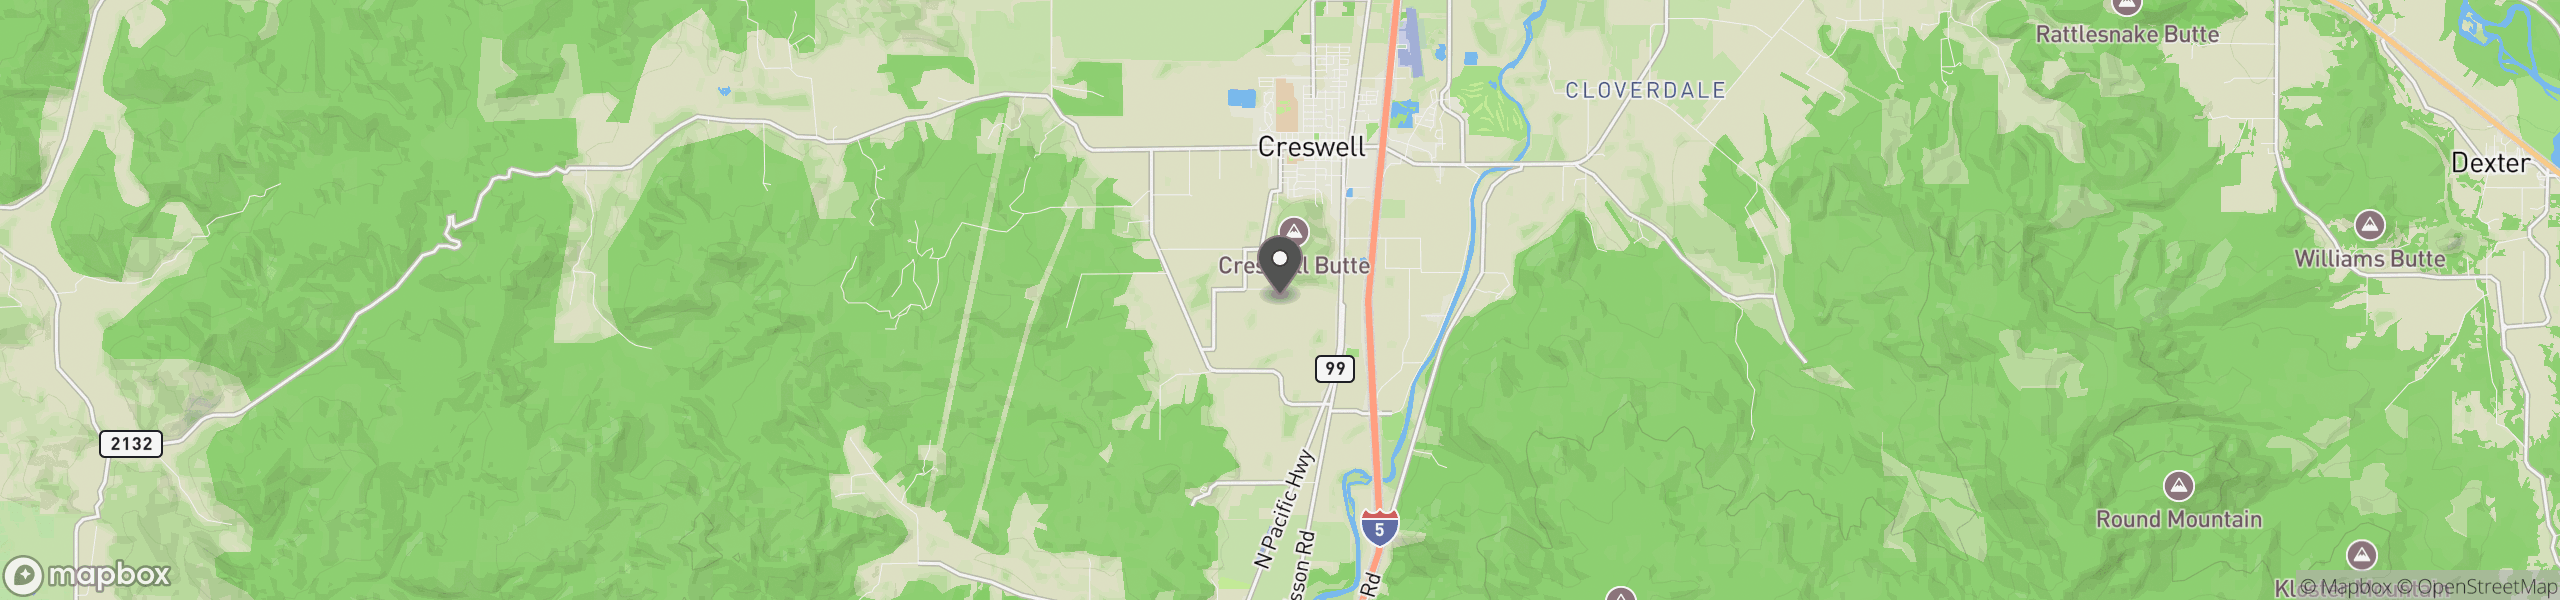 Creswell, OR 97426